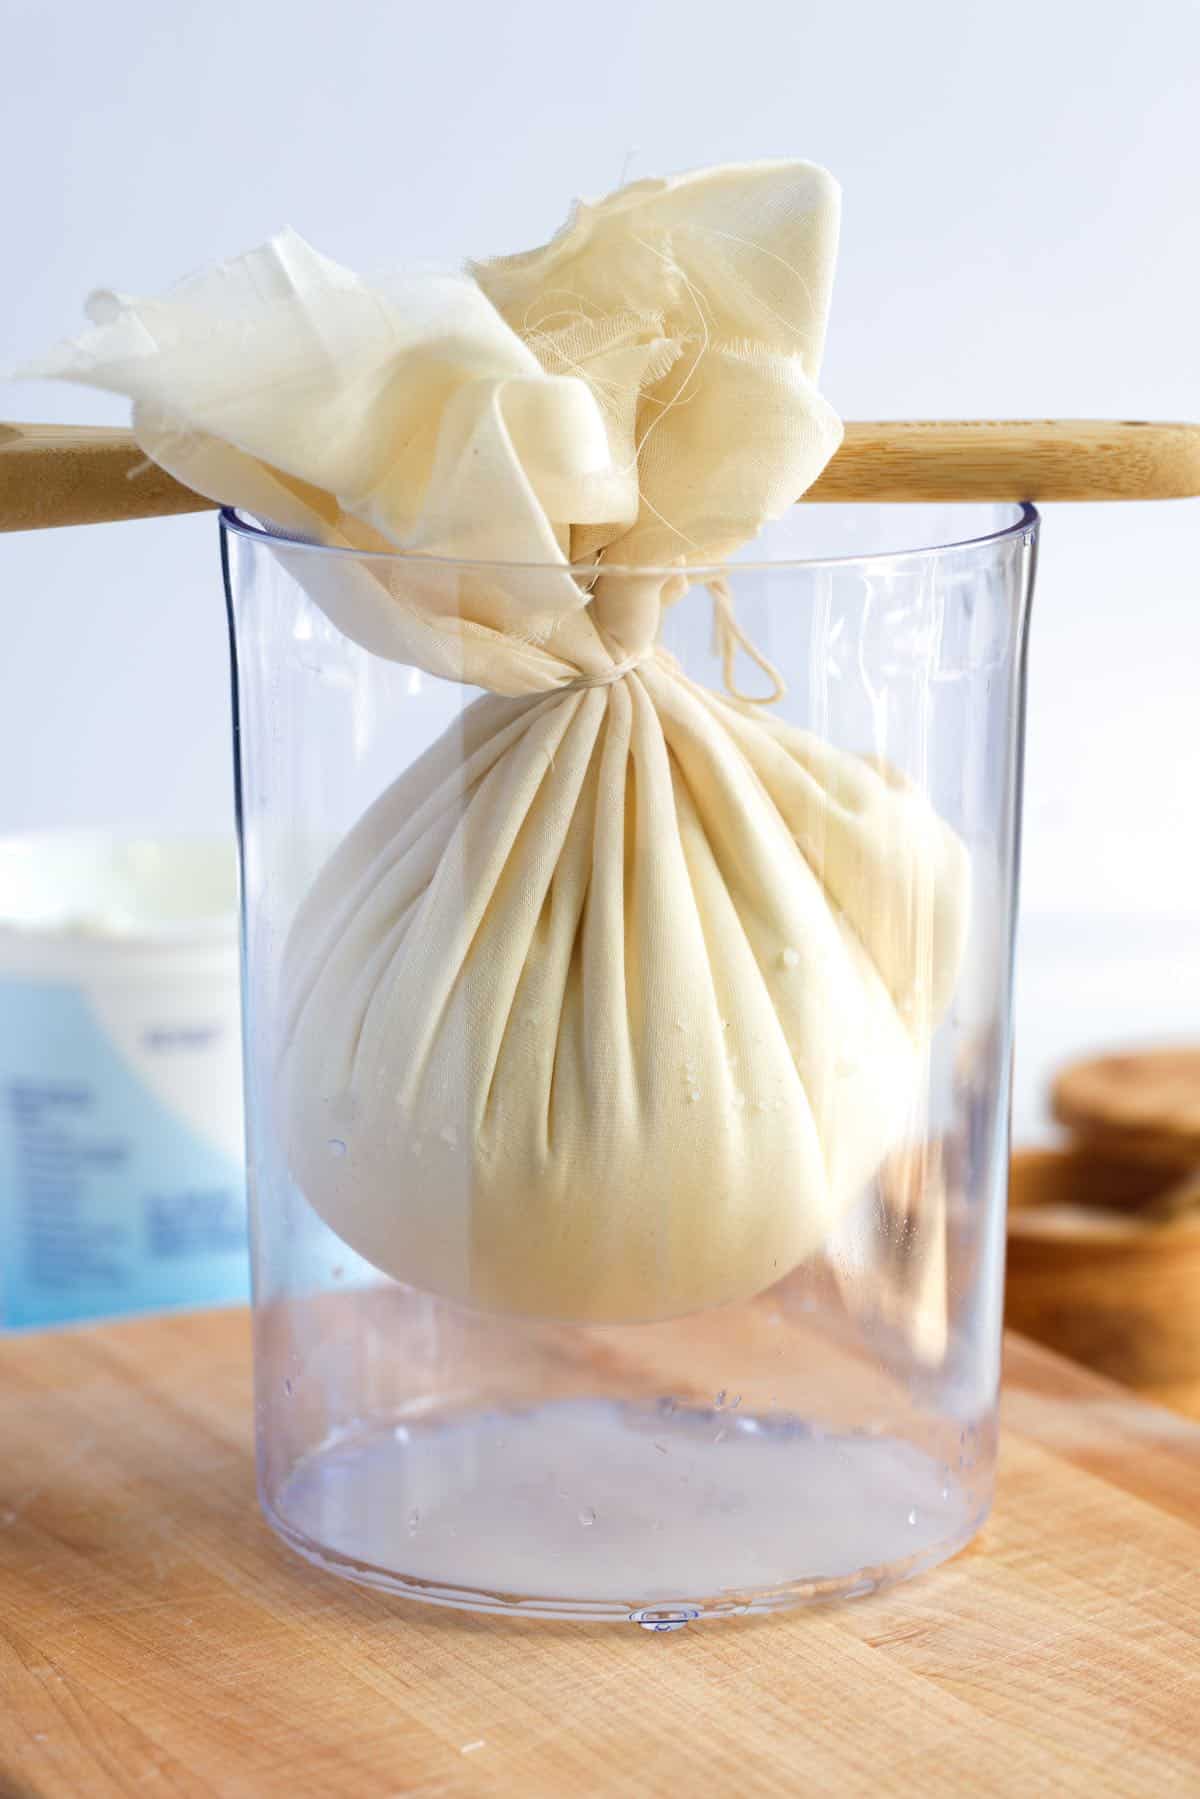 How to Make Labneh -- Cheesecloth wrapped yogurt with a wooden spoon holding it up to strain into a tall container.